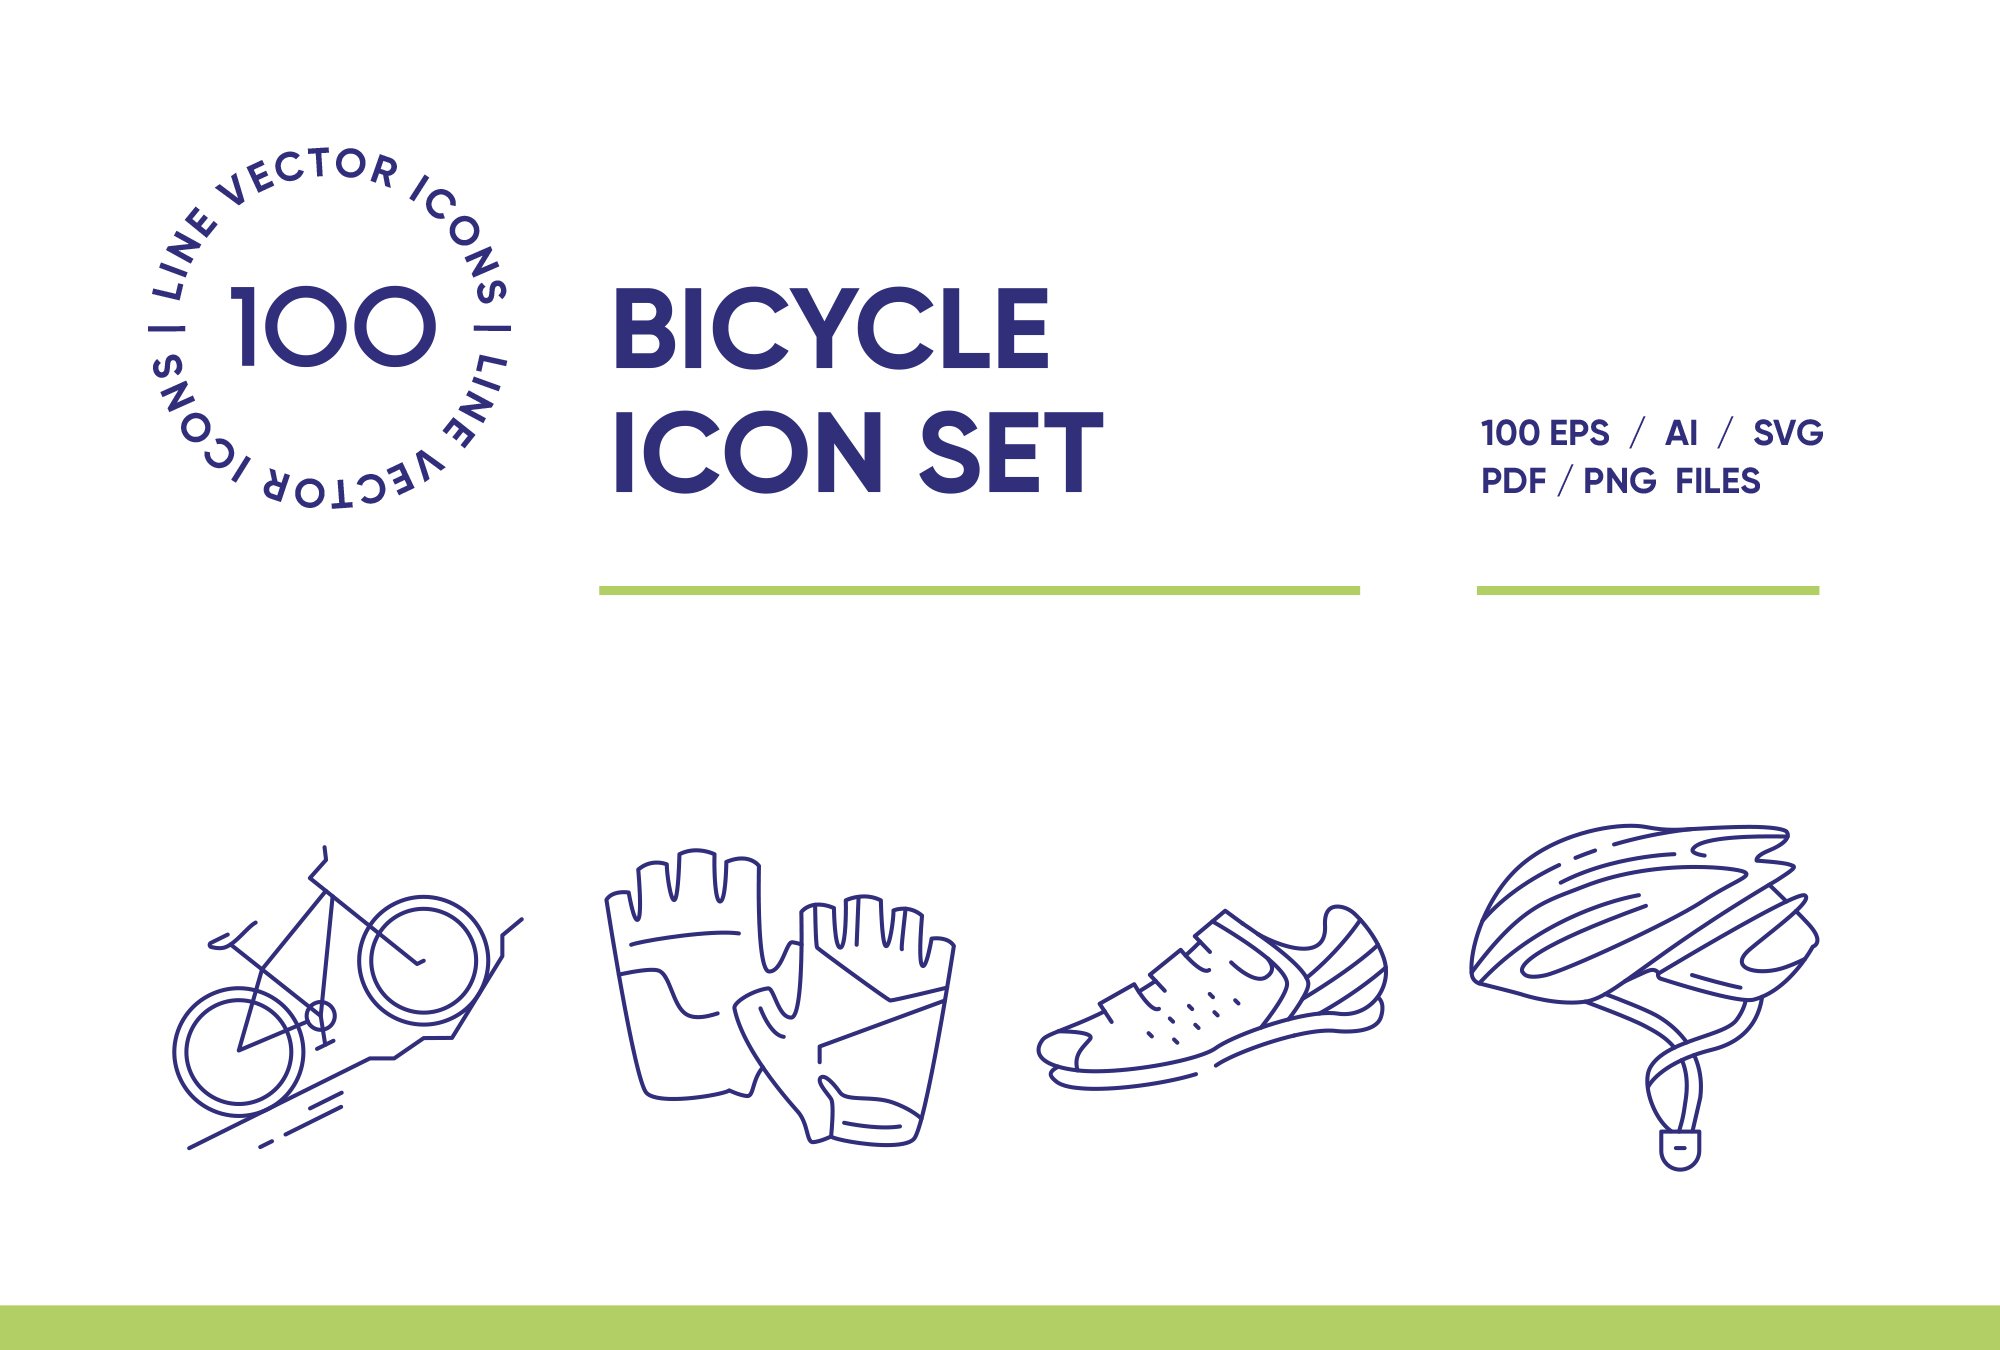 Bicycle Accessories Icons Set cover image.